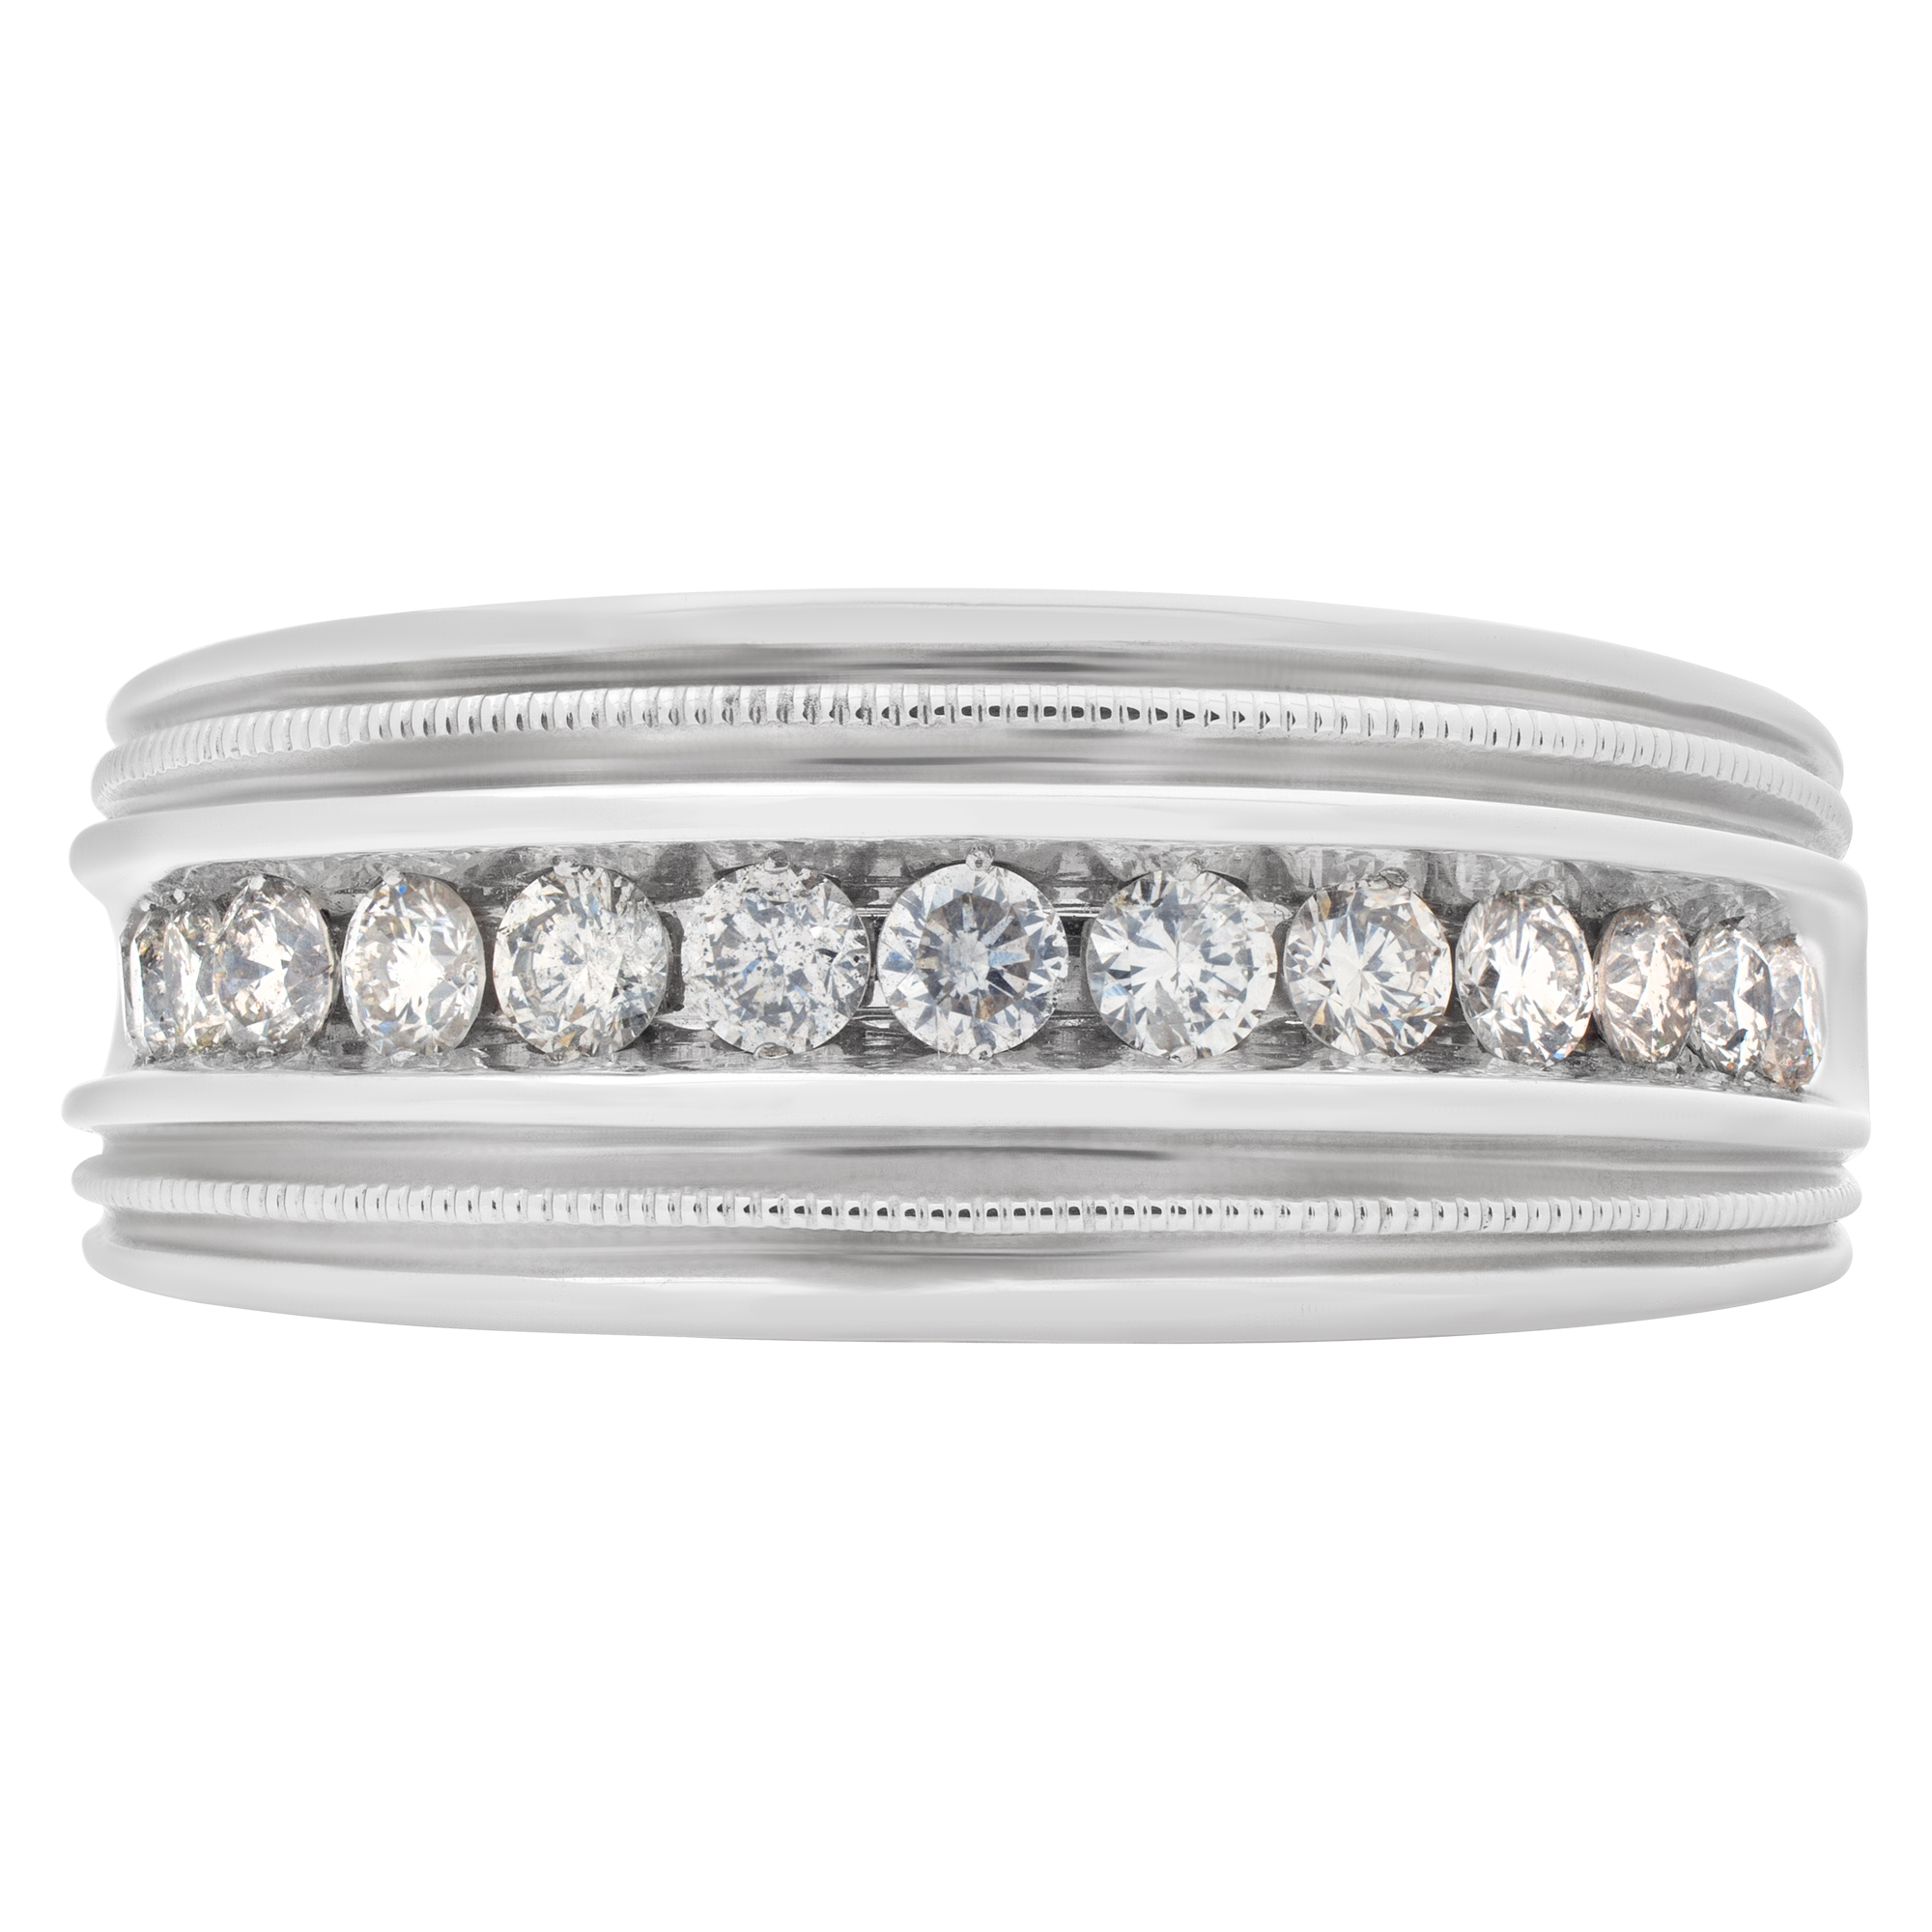 Diamond ring in 14k white gold with approx. 1 carat full cut round brilliant diamonds. (Stones) image 2